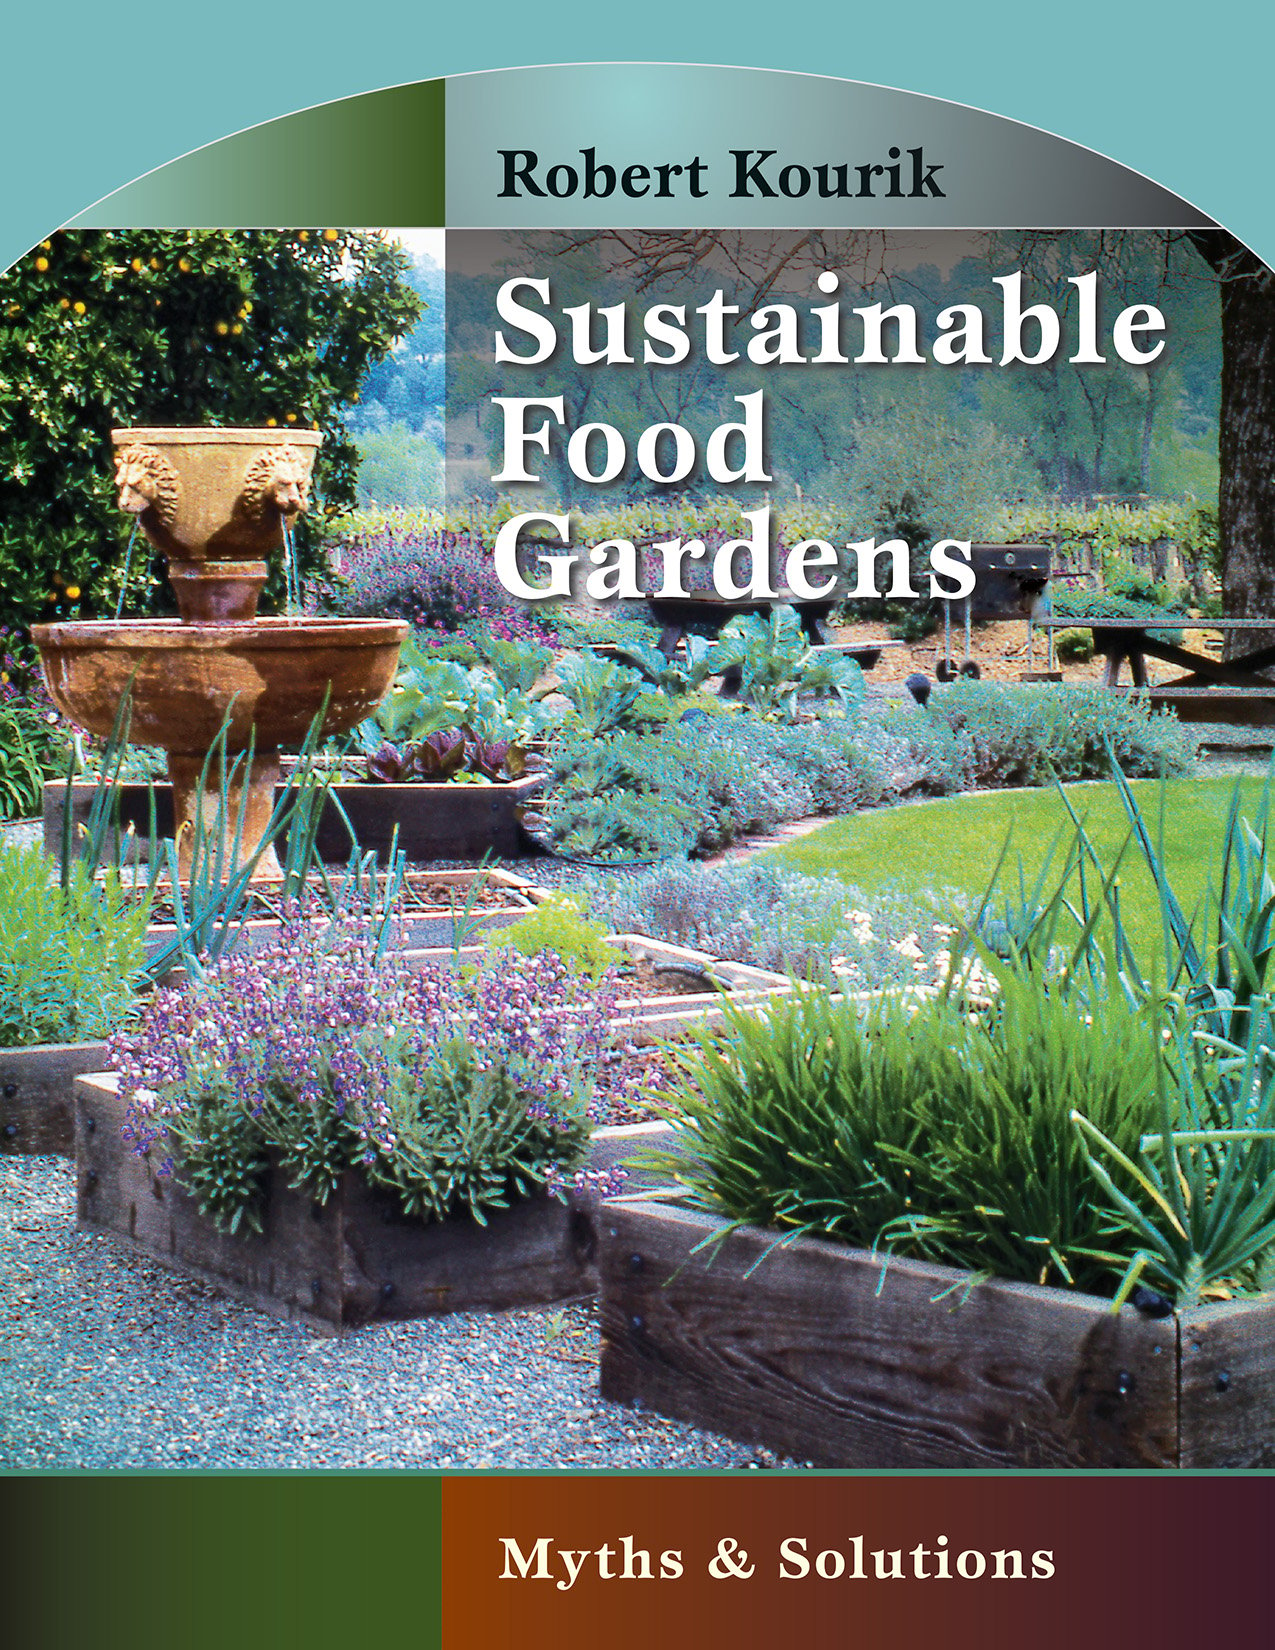 Sustainable　Publishing　Chelsea　Food　Gardens　Green